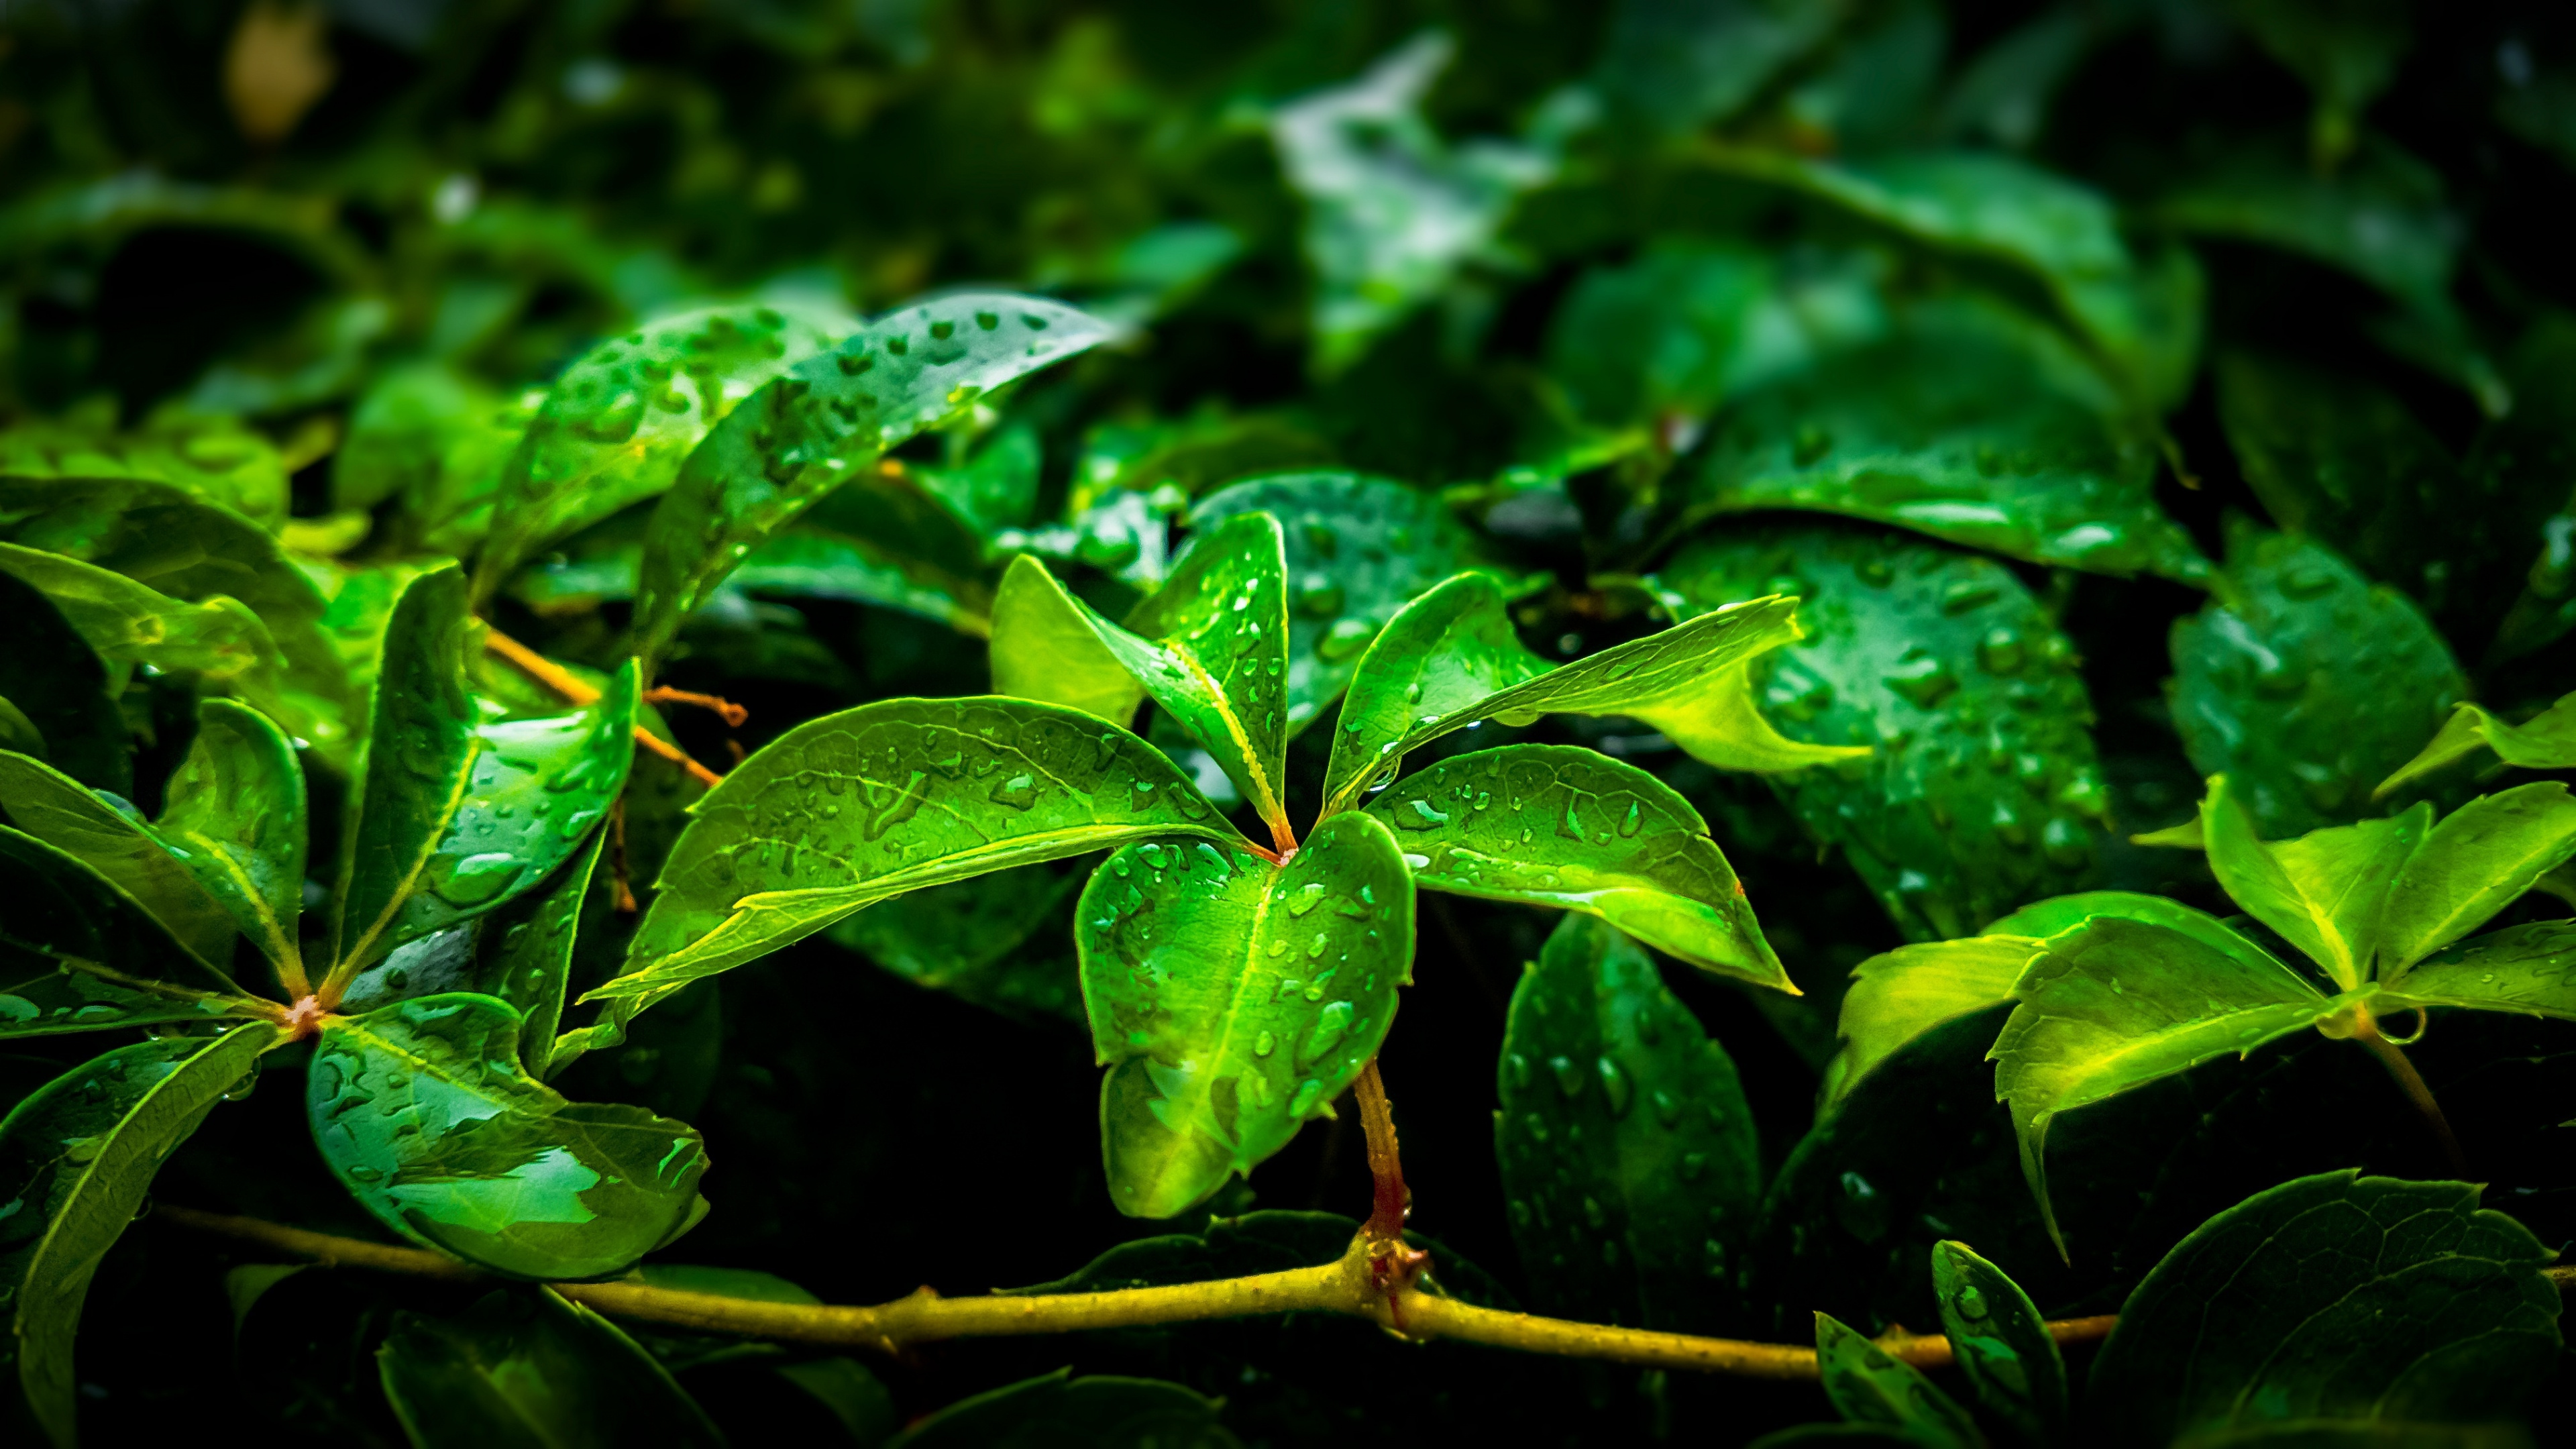 Green Leaf: The most important organs of most vascular plants are covered with raindrops. 3840x2160 4K Background.